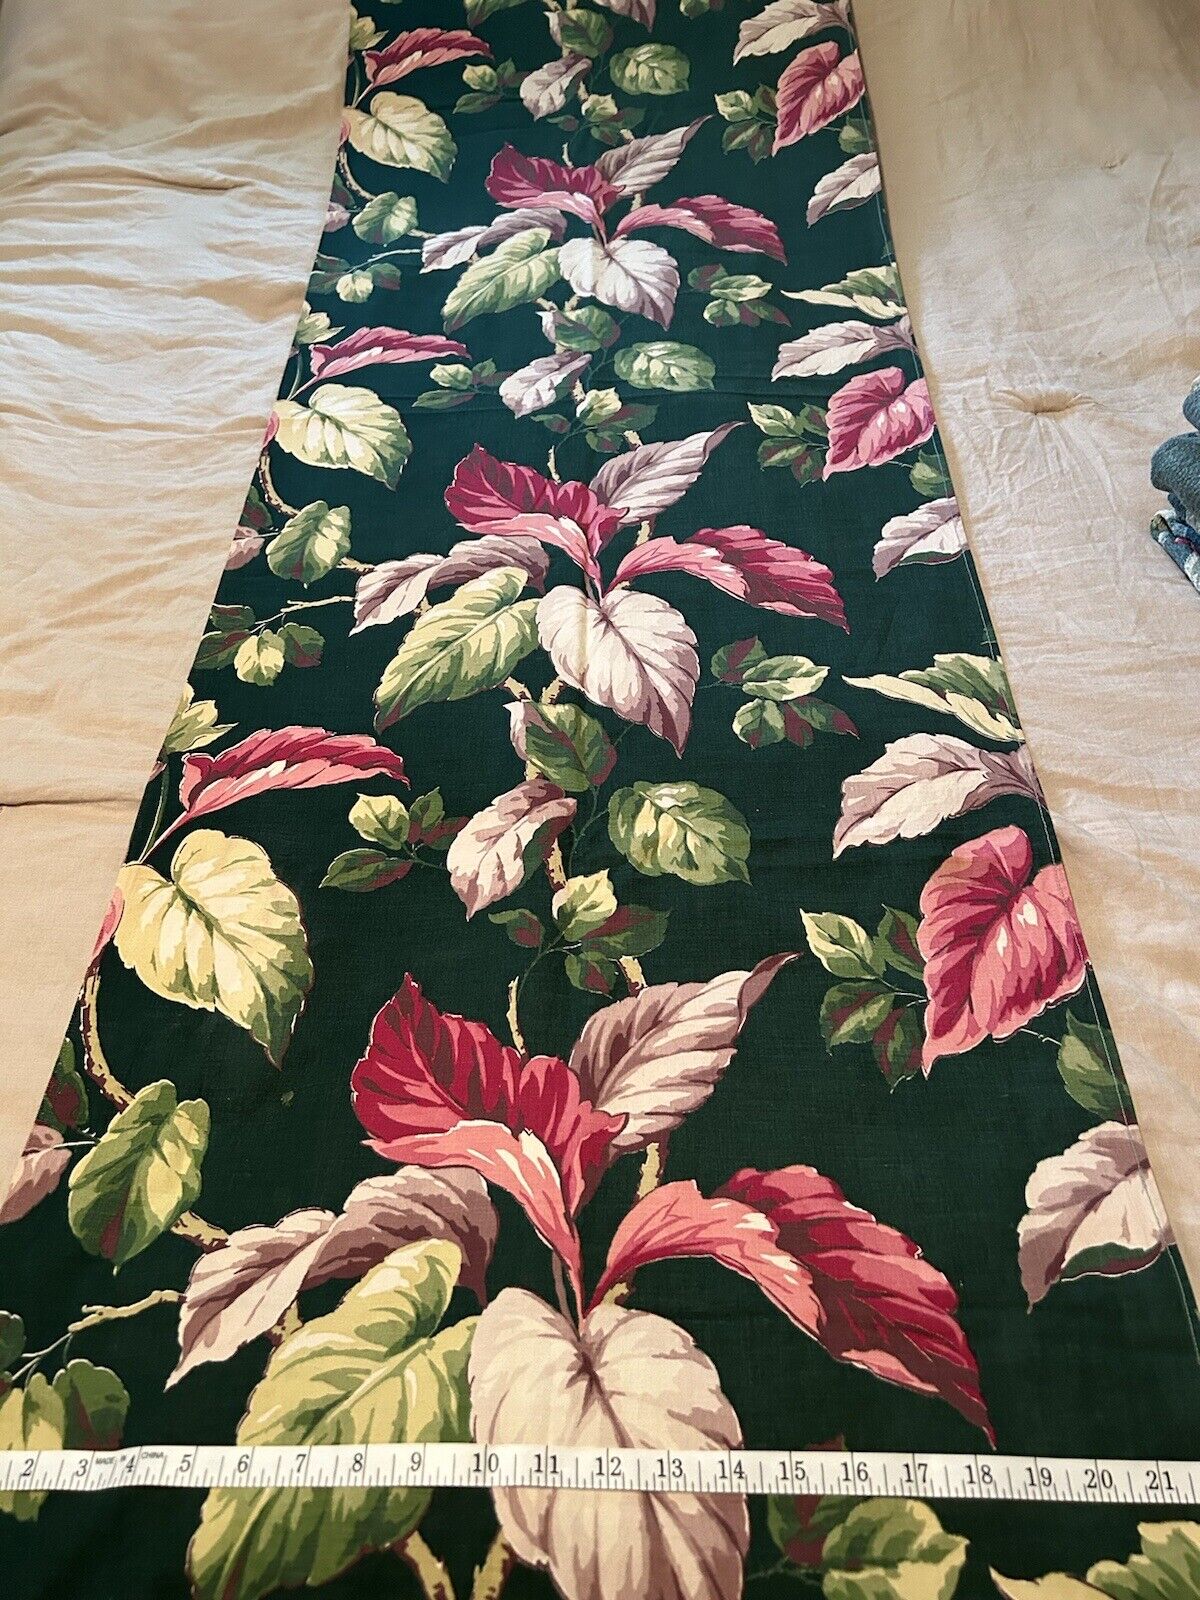 Vintage 1940’s Cotton Fabric Drapery Panel Green Leaf 1950’s Curtain Tropical